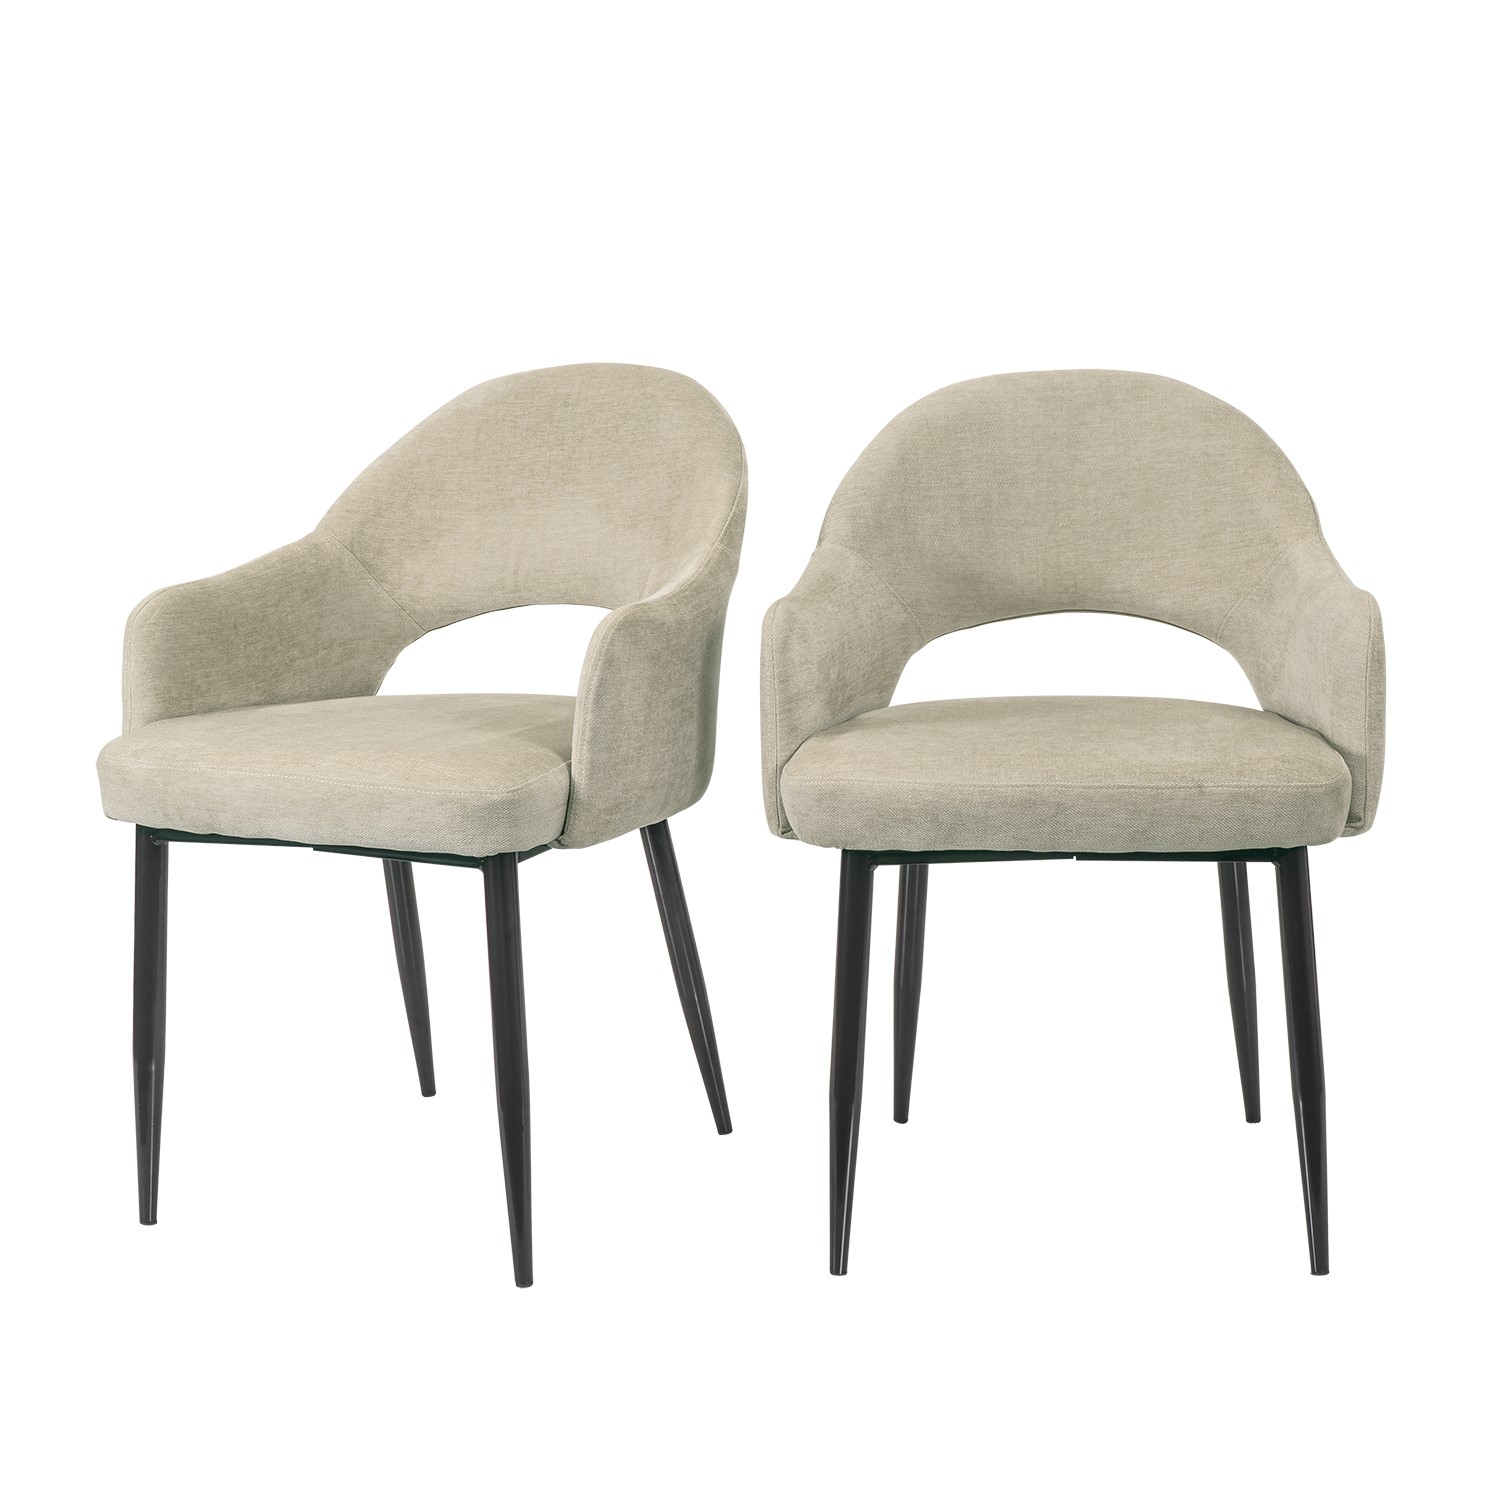 Photo of Set of 2 beige fabric dining chairs - colbie